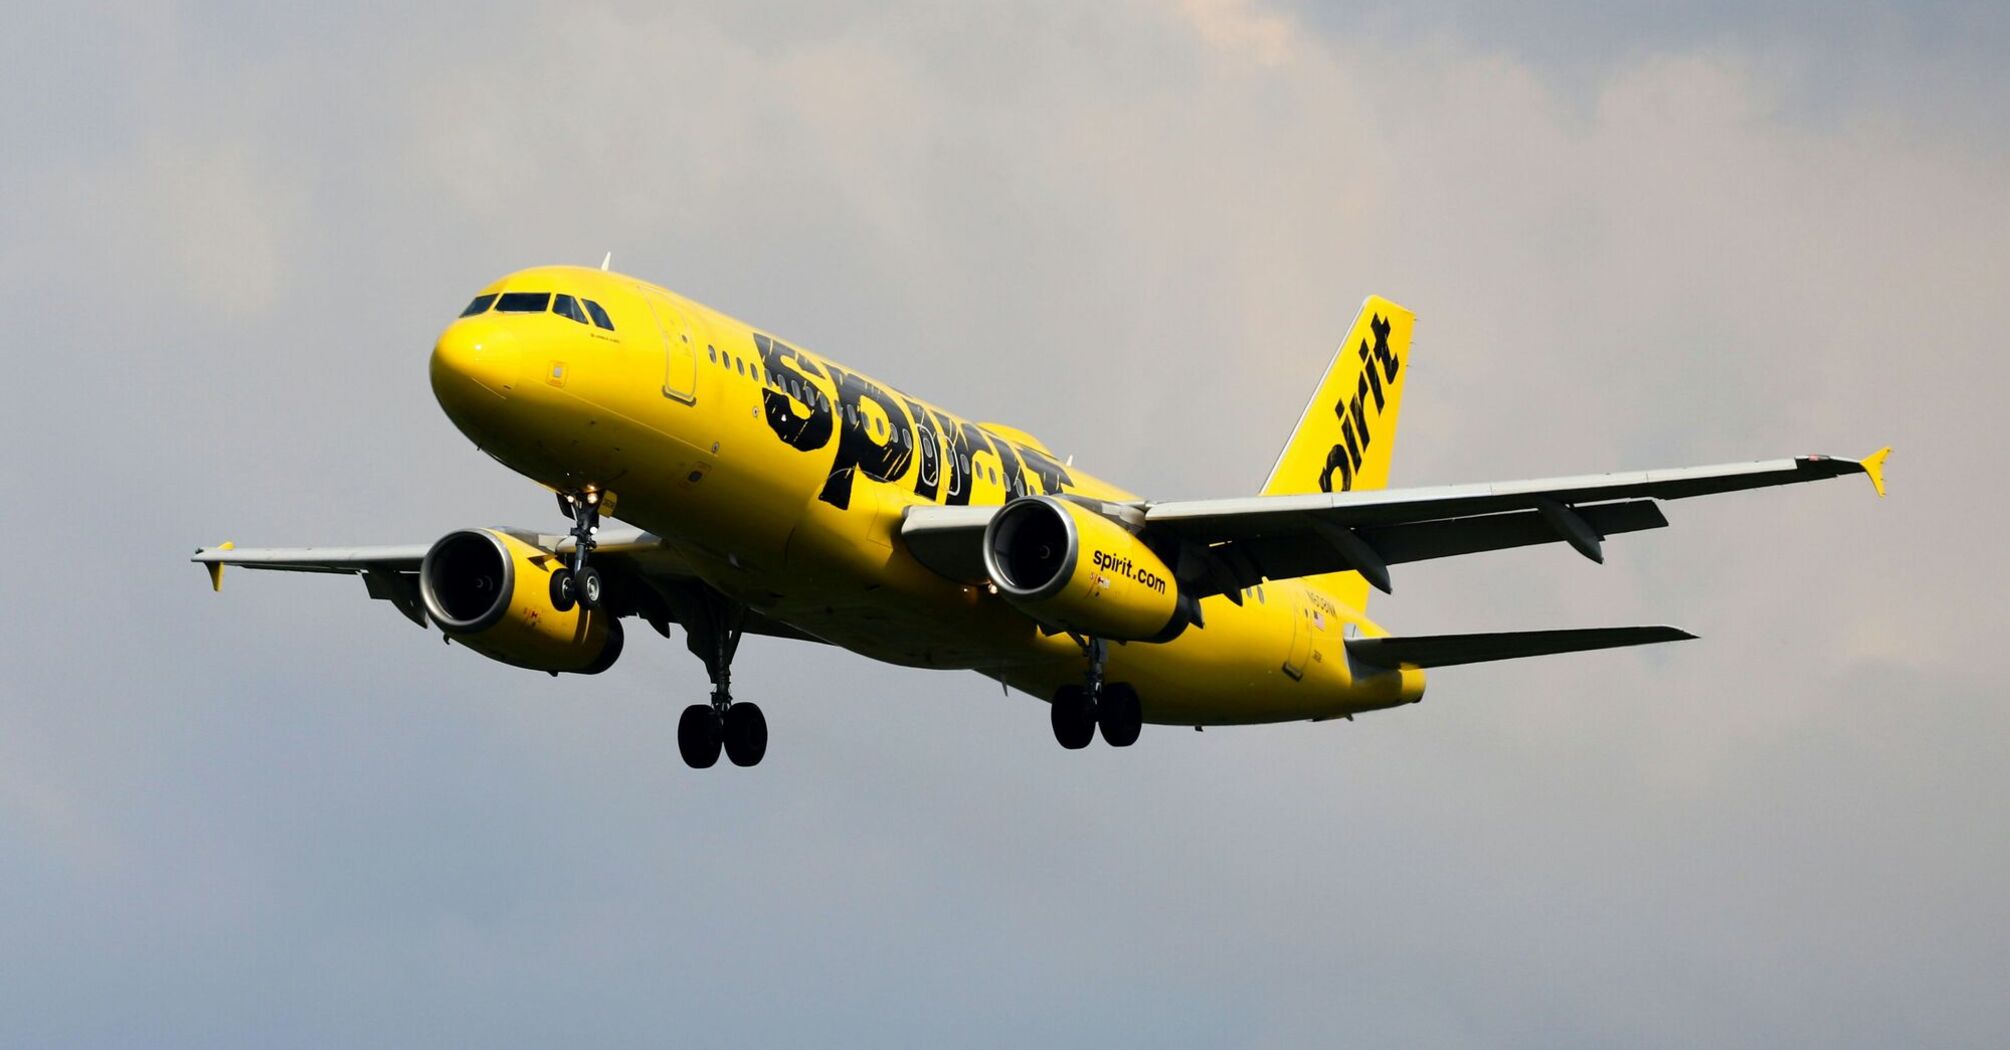 A yellow and black Spirit airplane flying